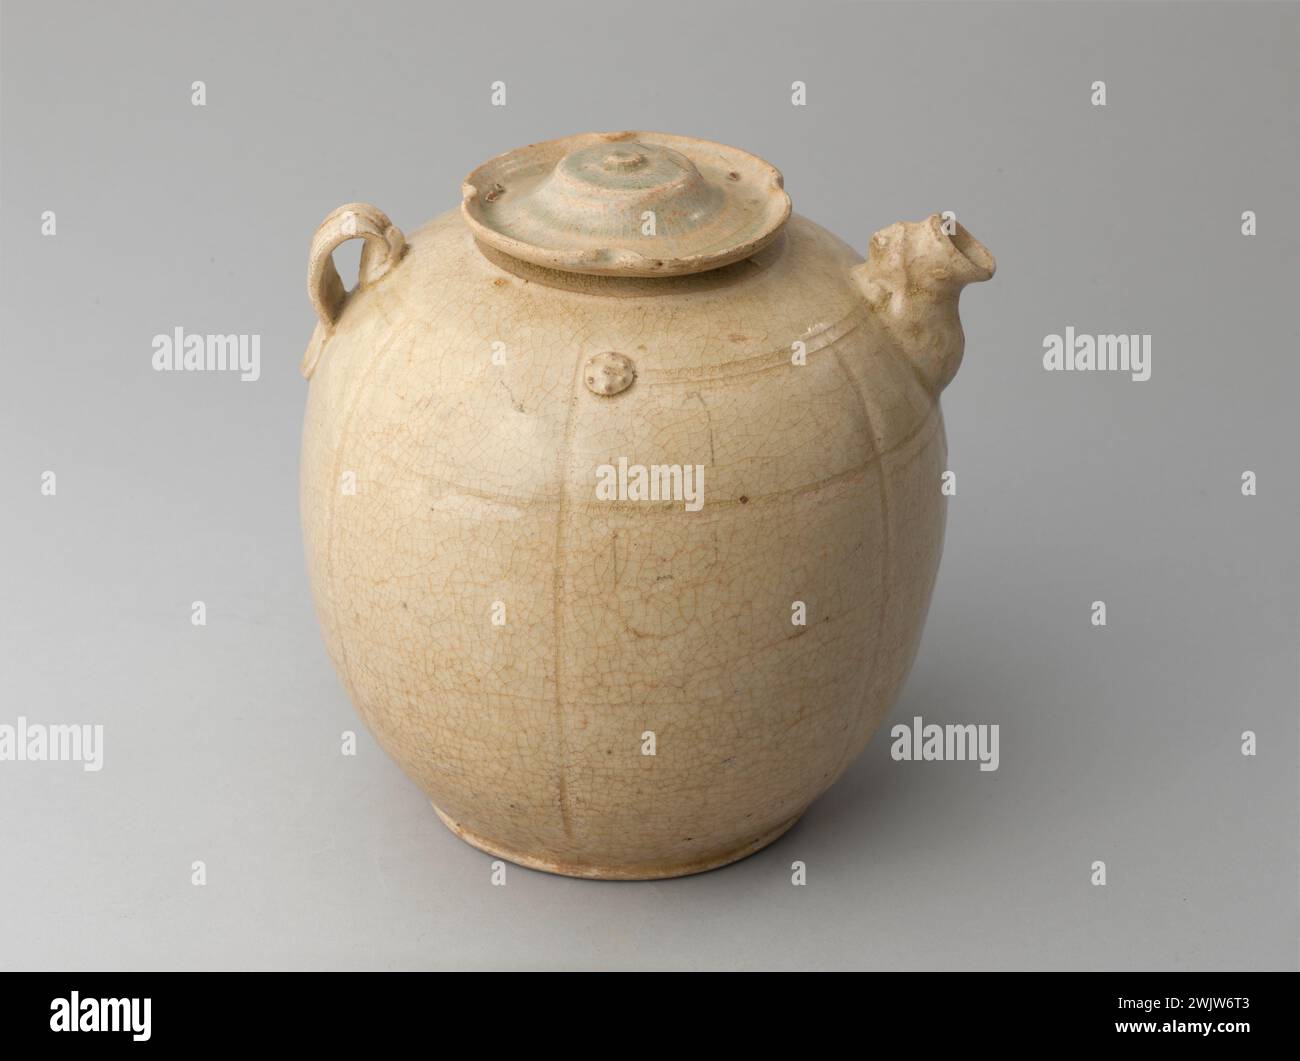 Verseuse ". Céramique. XiI-Xively sixteen. Parigi, Museum Museum. Paris, museum meer and semean. 144391-22 Asian art, art of Vietnam, Vietnamese art, ceramic, dishes, pouches, 12th XIII 12th 12th 12th 12th century, 13th XIIIth 13th 13th 13th 13th century, XIVth XIV 14th 14th 14th century Stock Photo